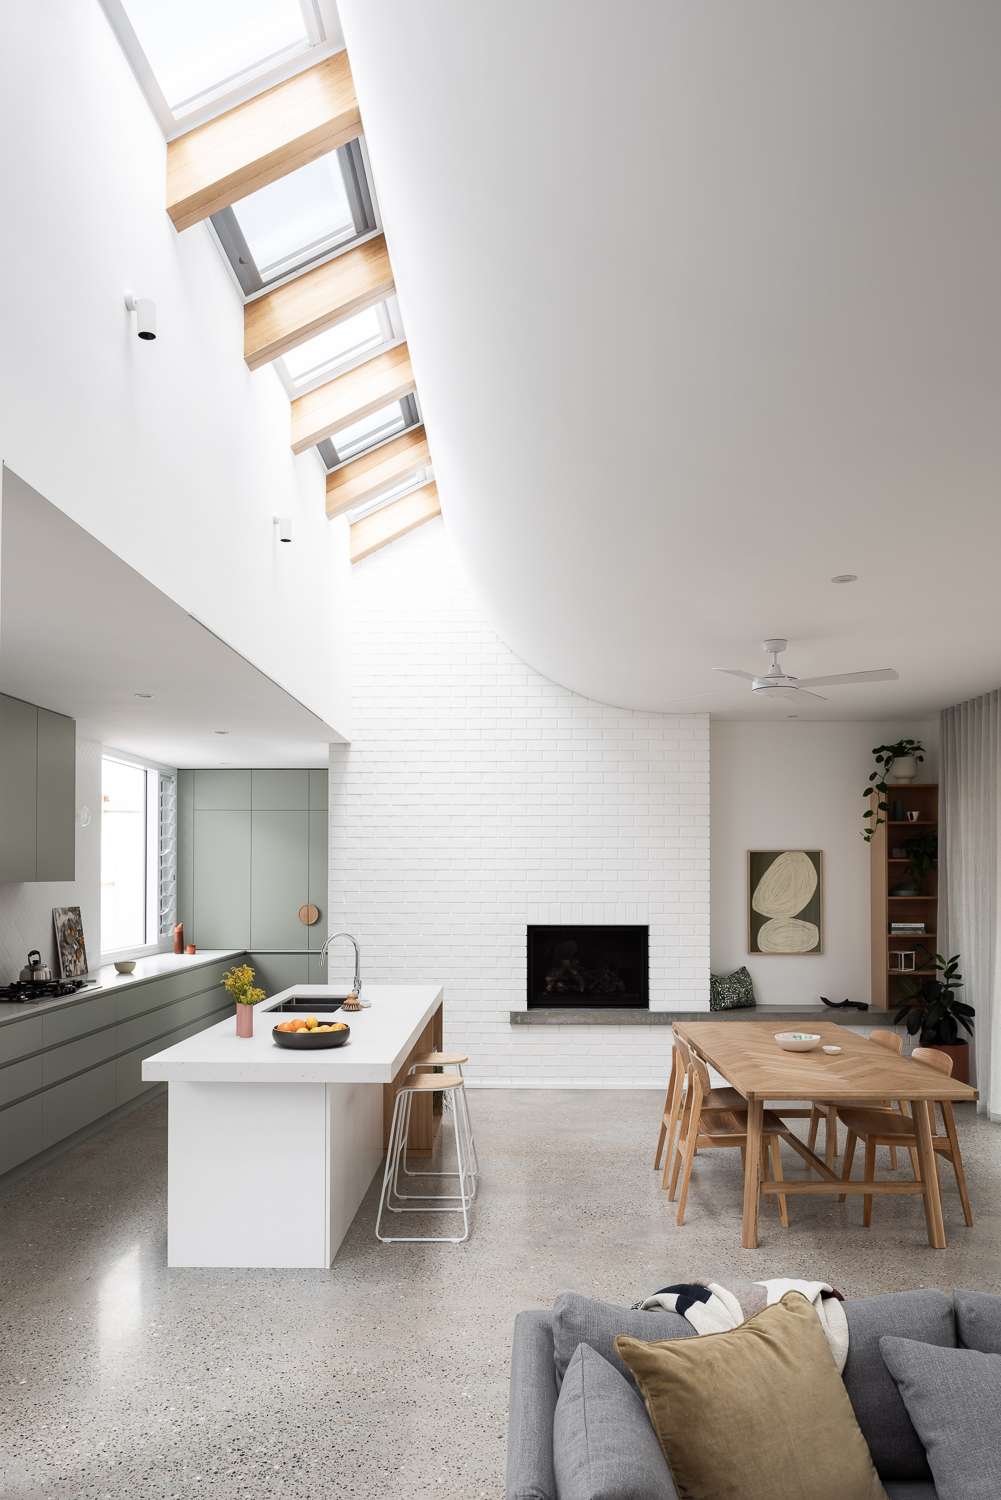 The Third by Dalecki Design showing kitchen and dining space with a large skylight overhead